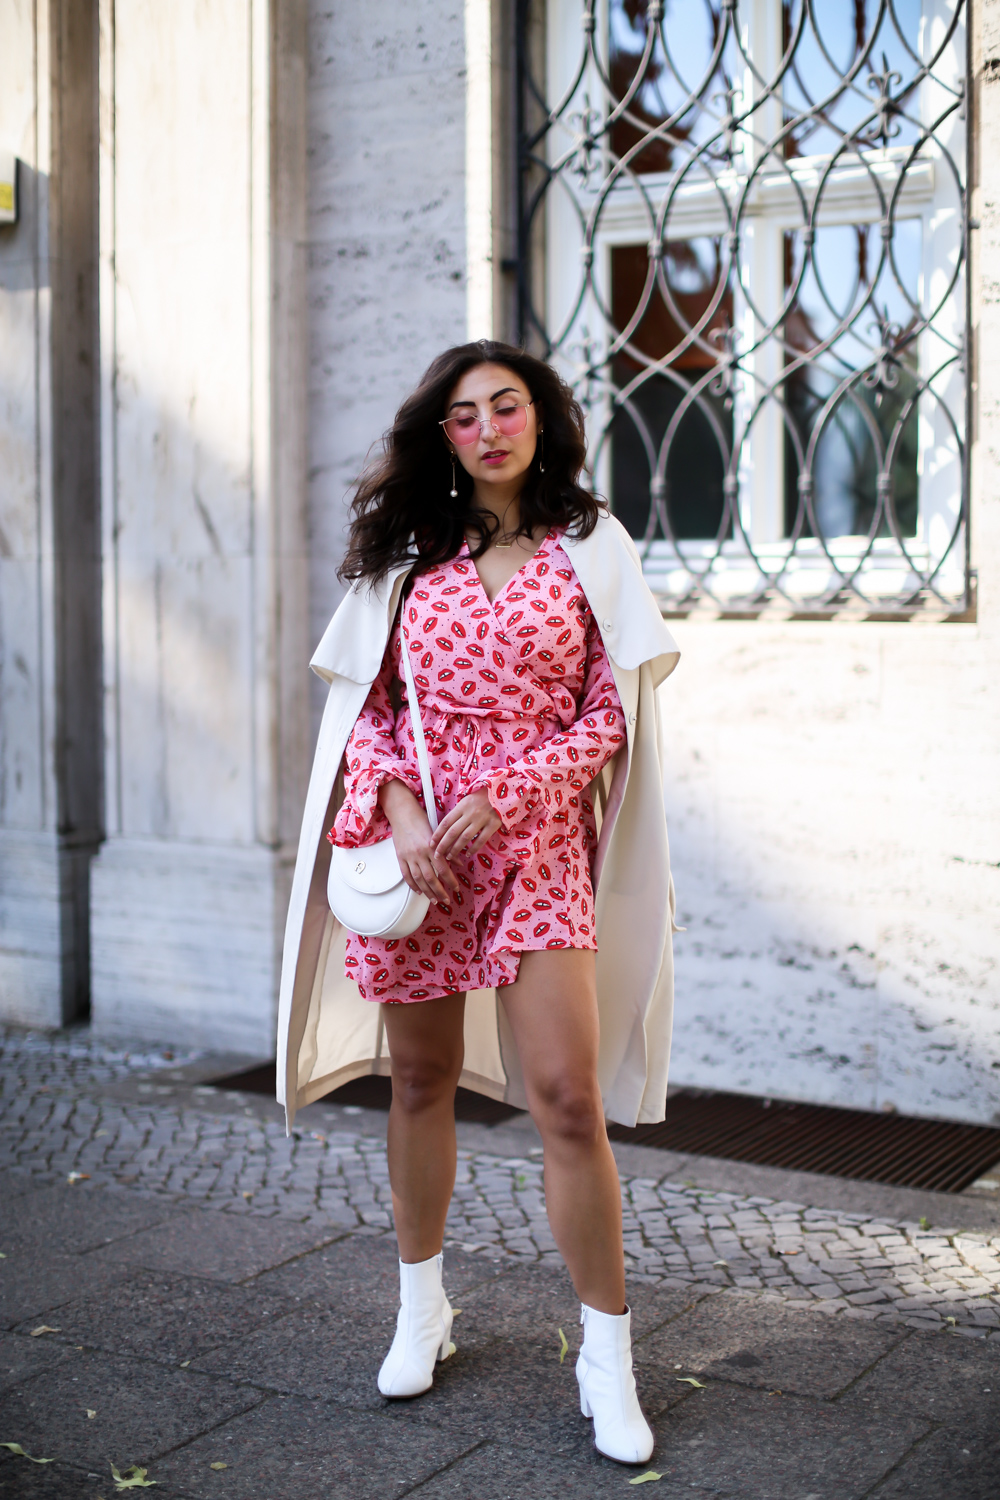 loavies wrap dress pink white scarosso boots trench coat hm white aigner bag preppy party summer look streetstyle fashion modeblog berlin blog samieze